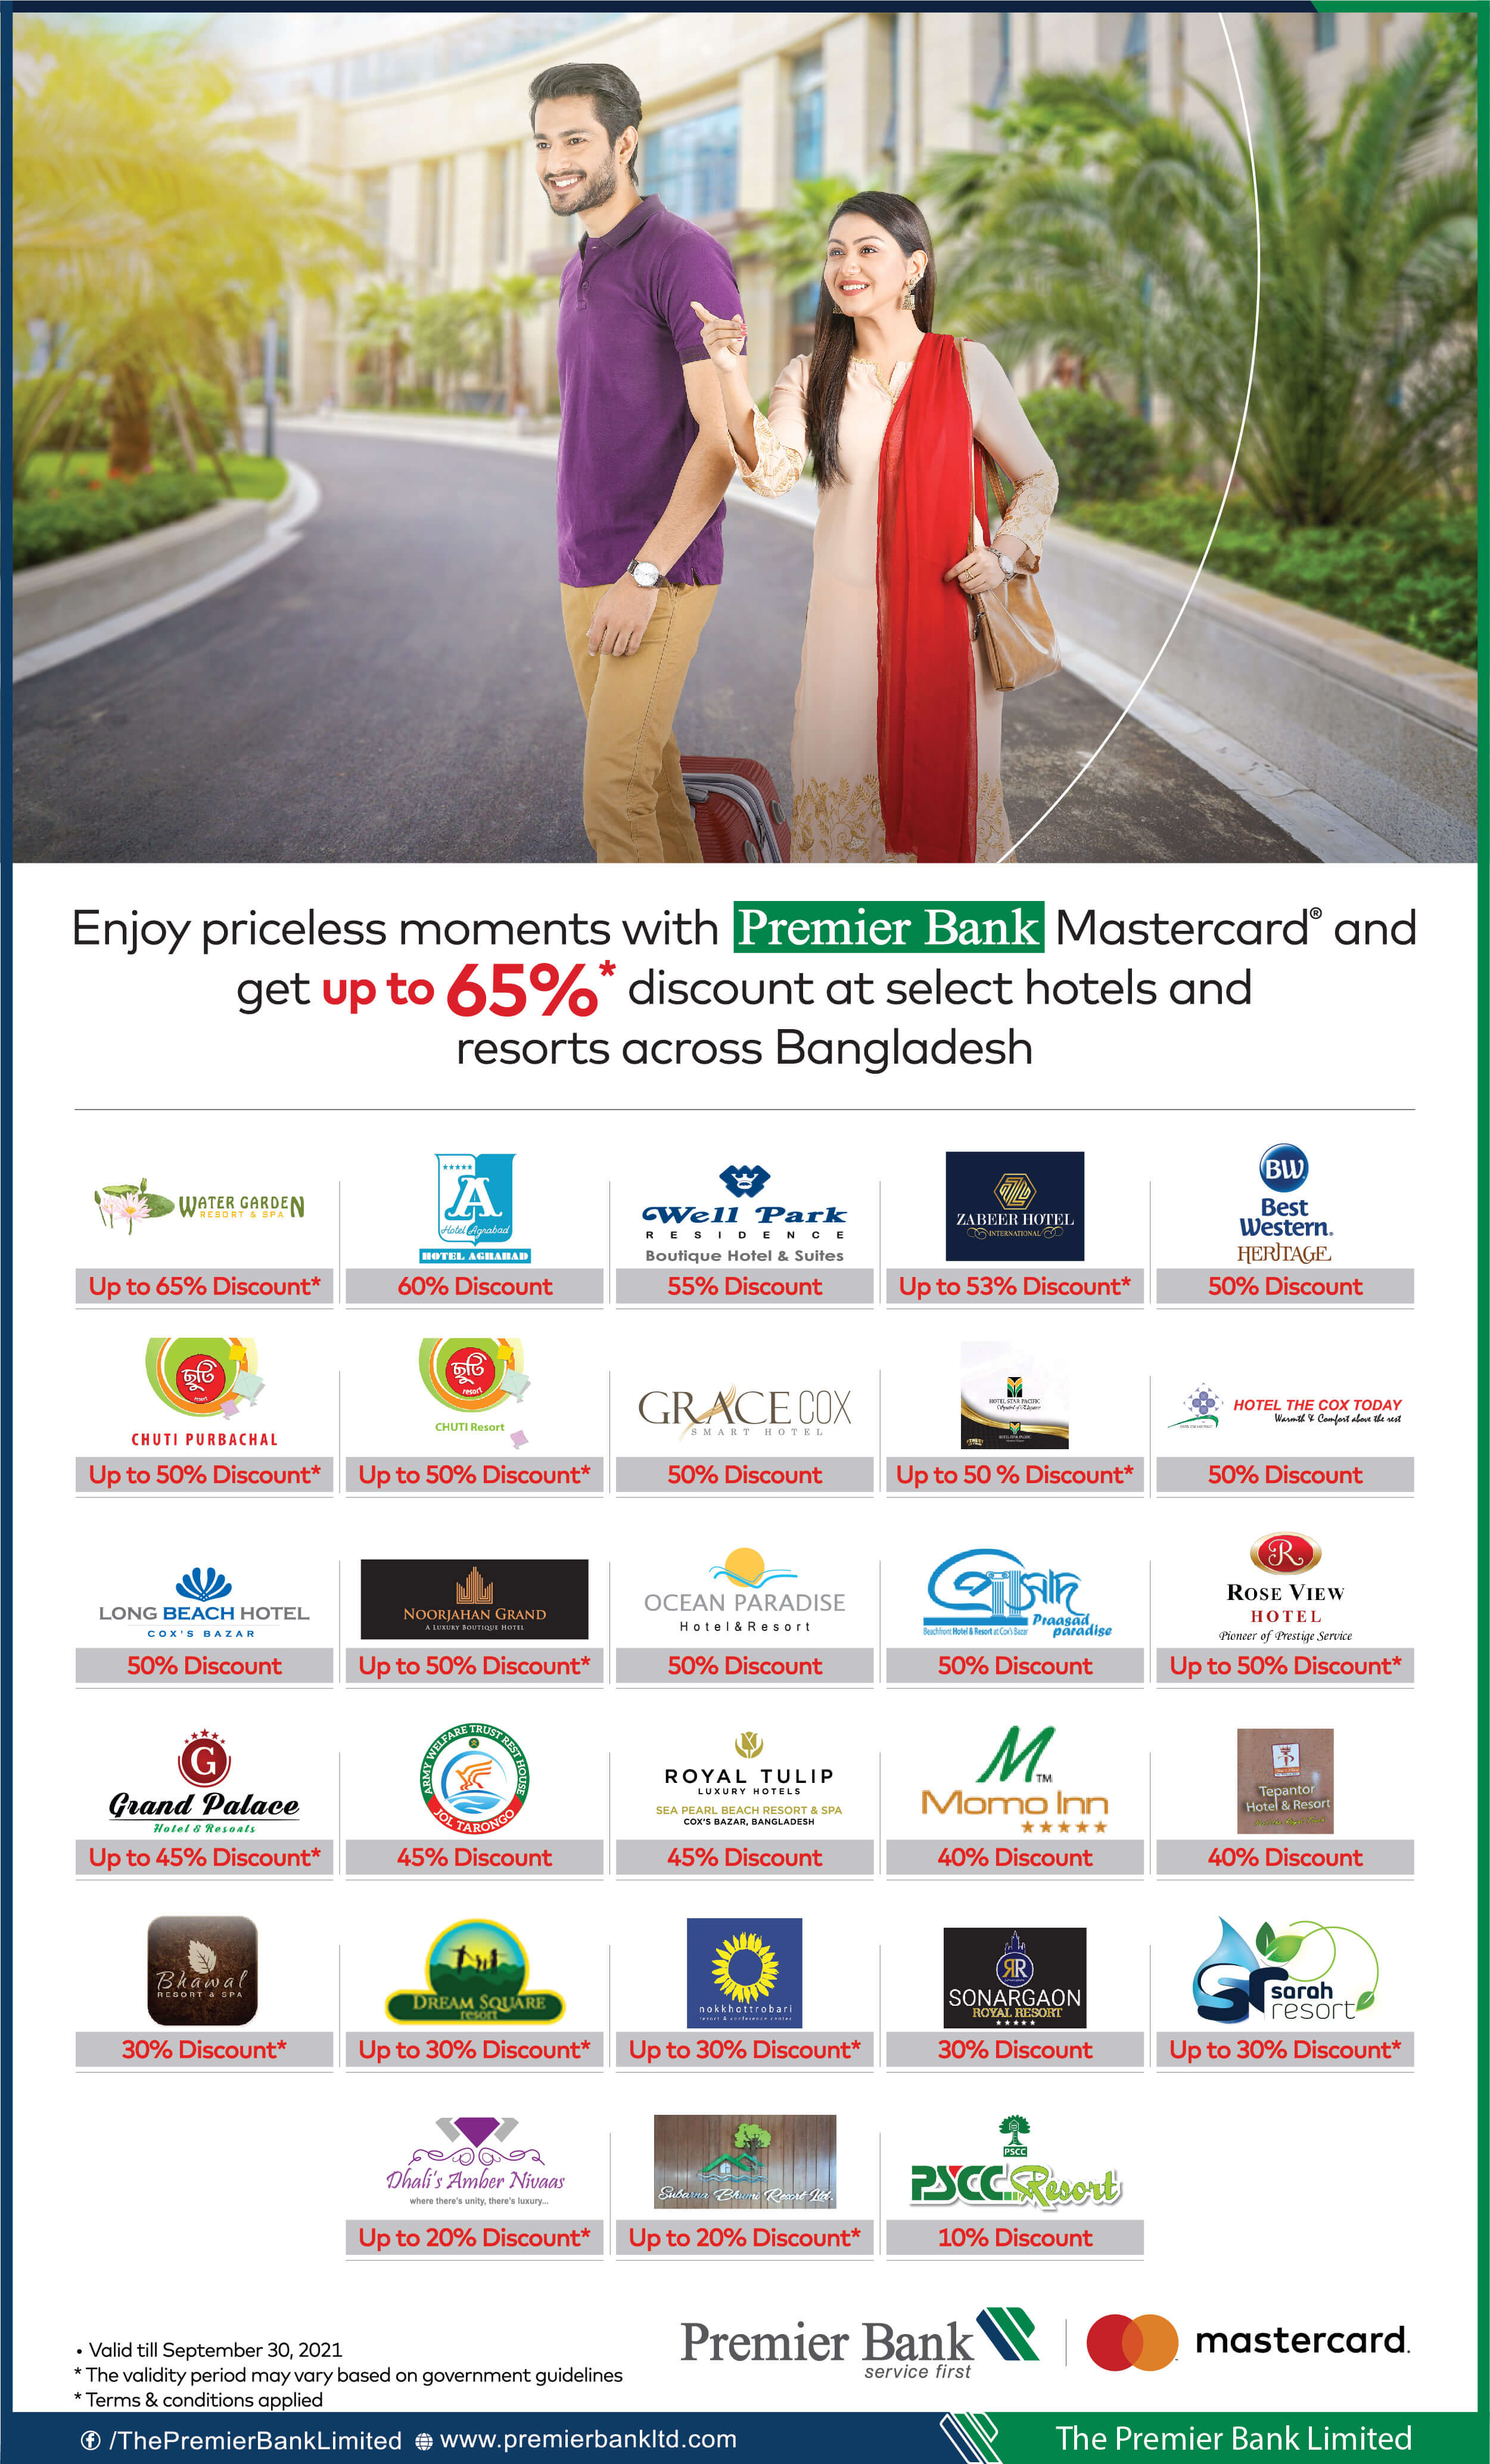 Enjoy Priceless moments with Premier Bank Mastercard